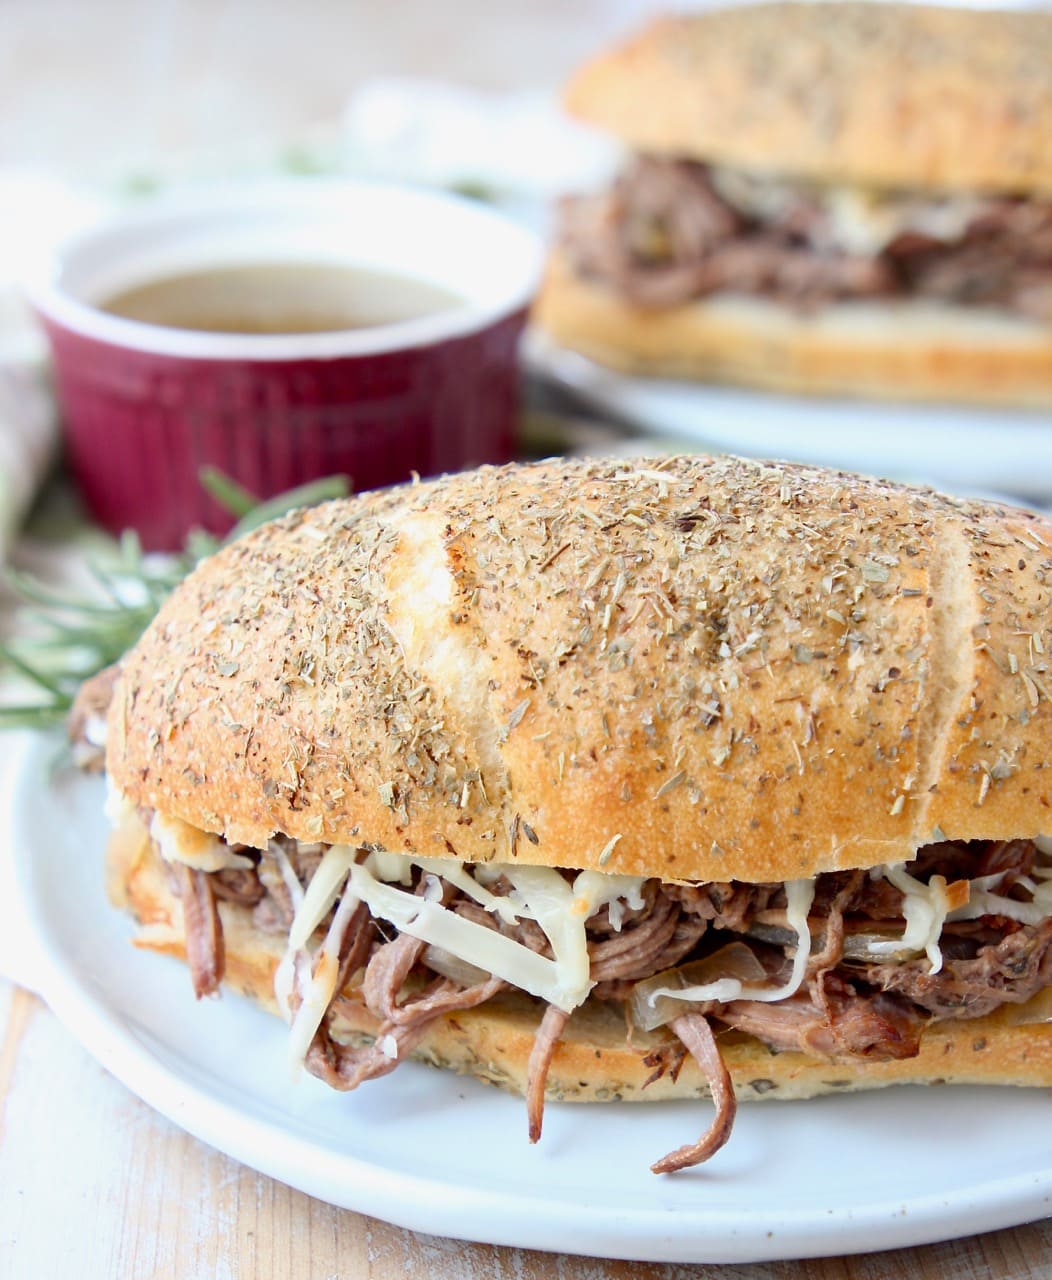 Shredded tri tip sandwich on plate with bowl of au jus